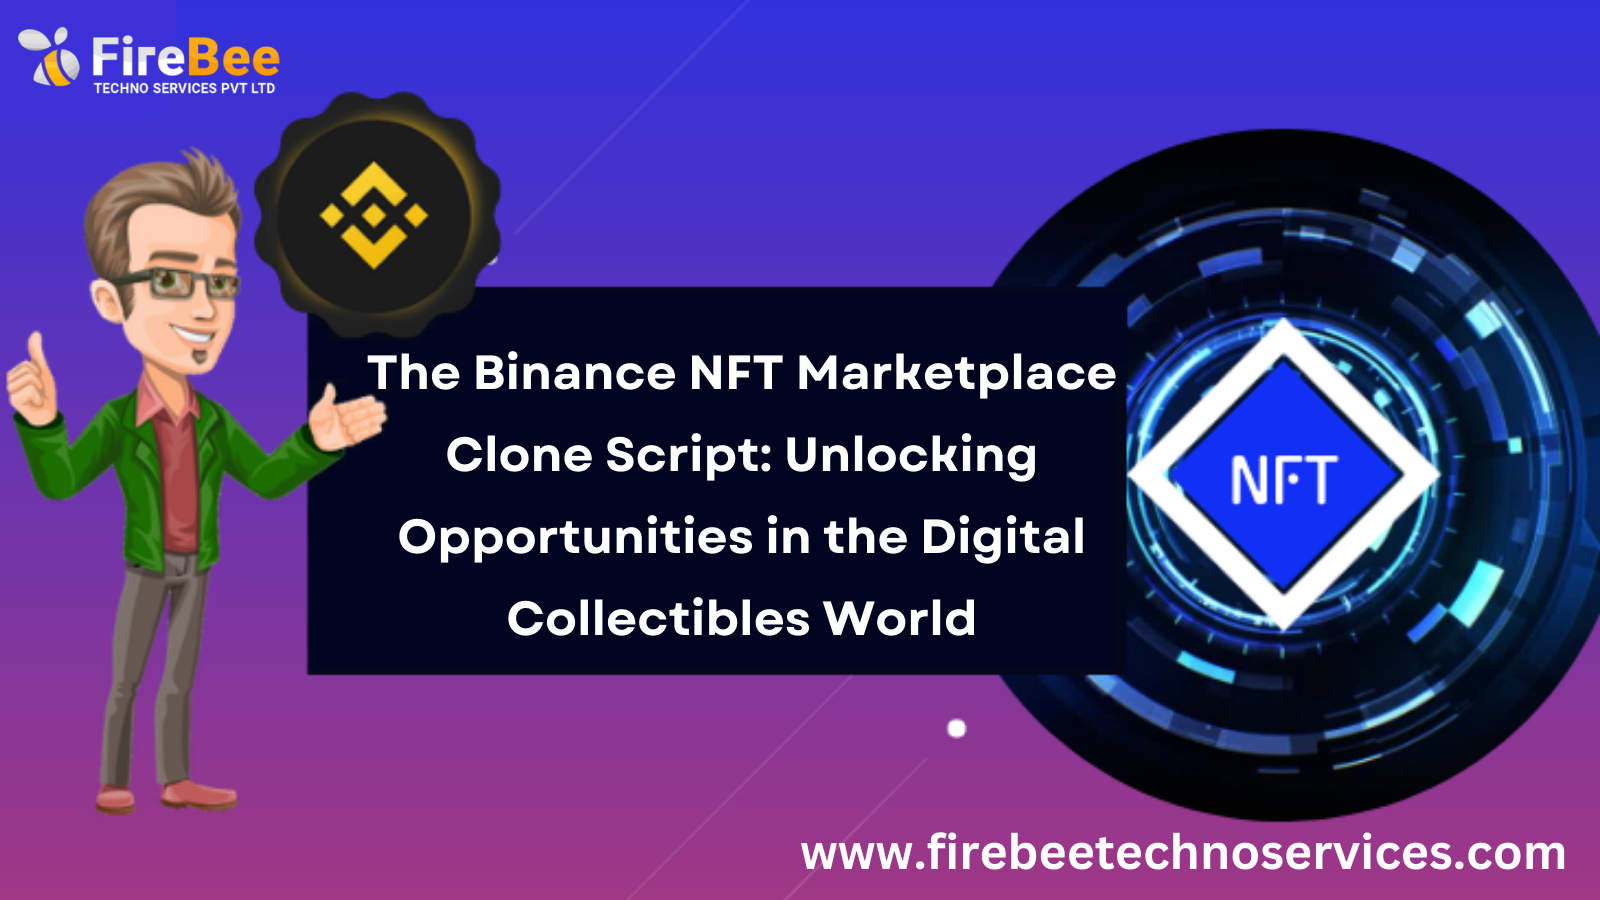 The Binance NFT Marketplace Clone Script Unlocking Opportunities in the Digital Collectibles World.png